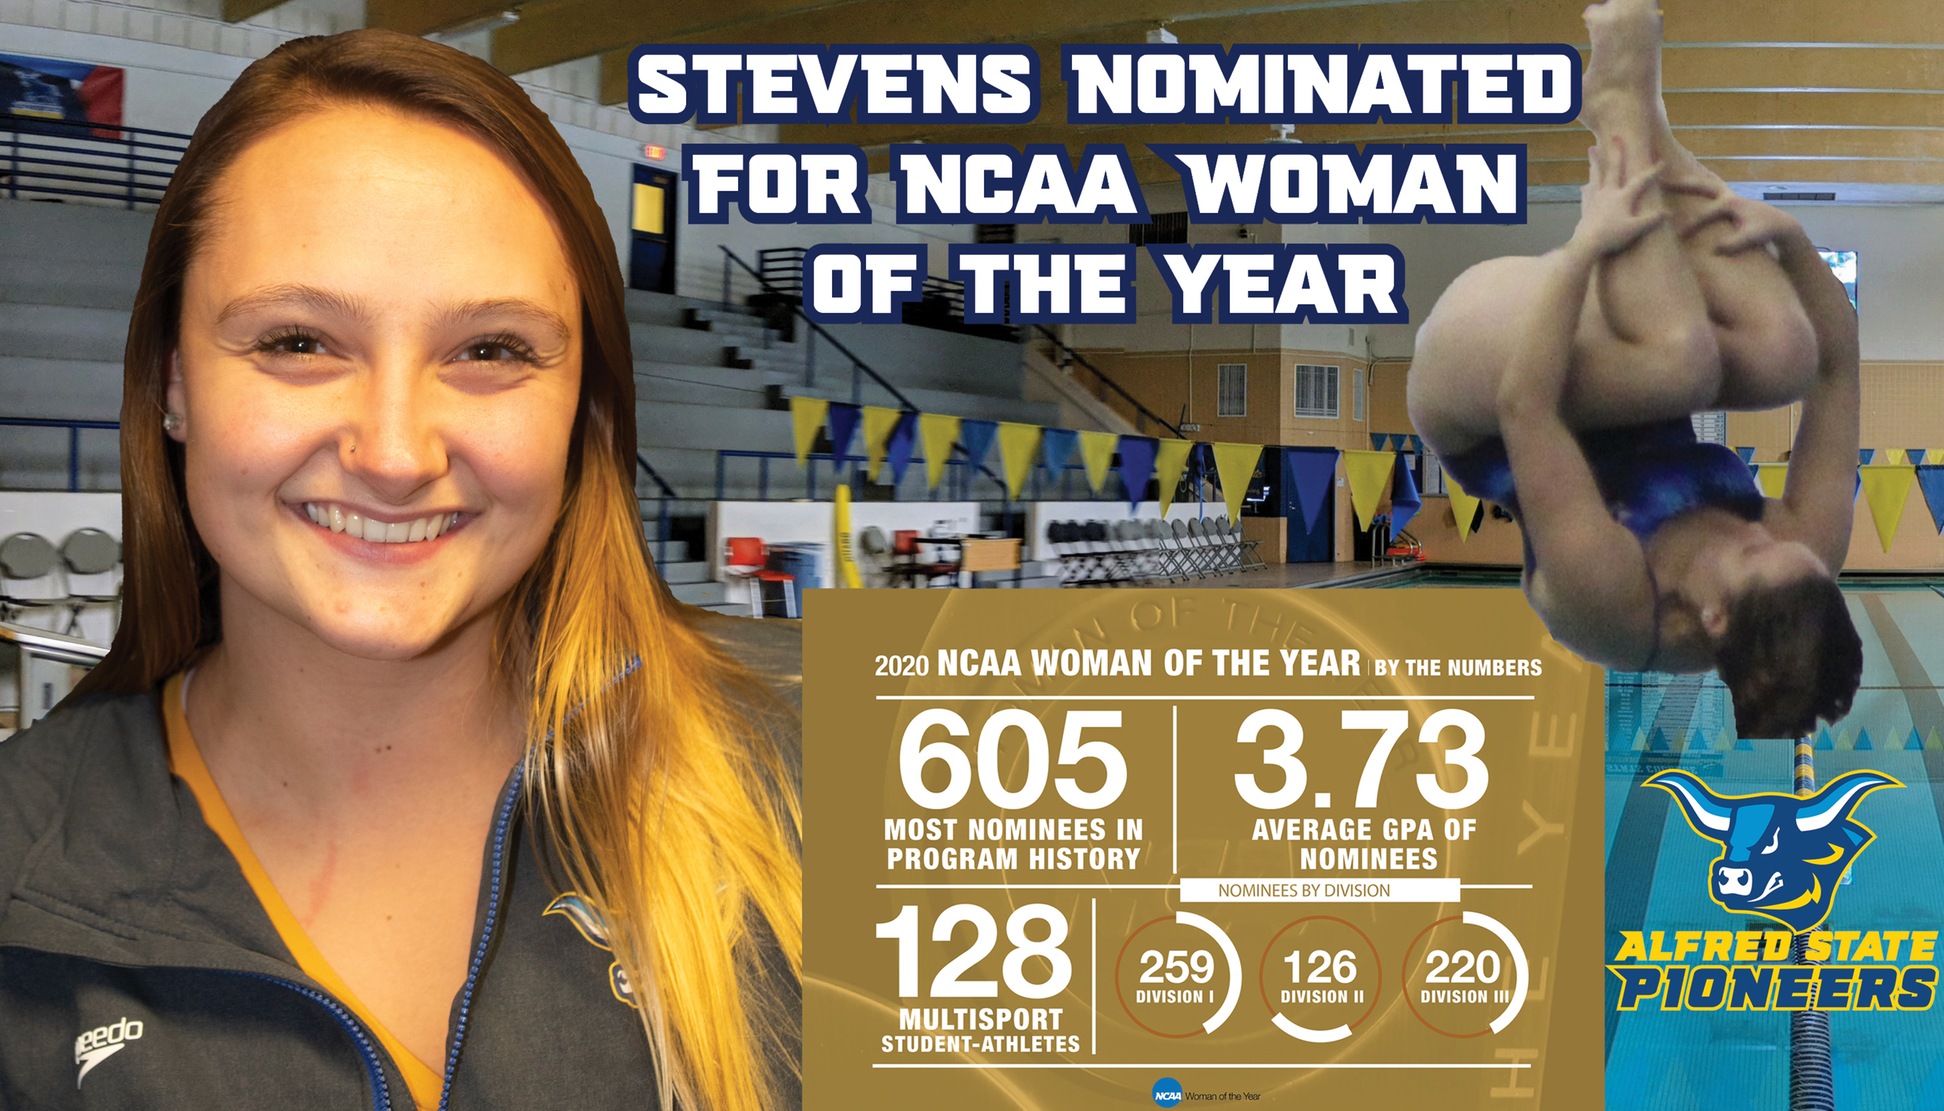 Sarah Stevens Nominated for NCAA Woman of the Year